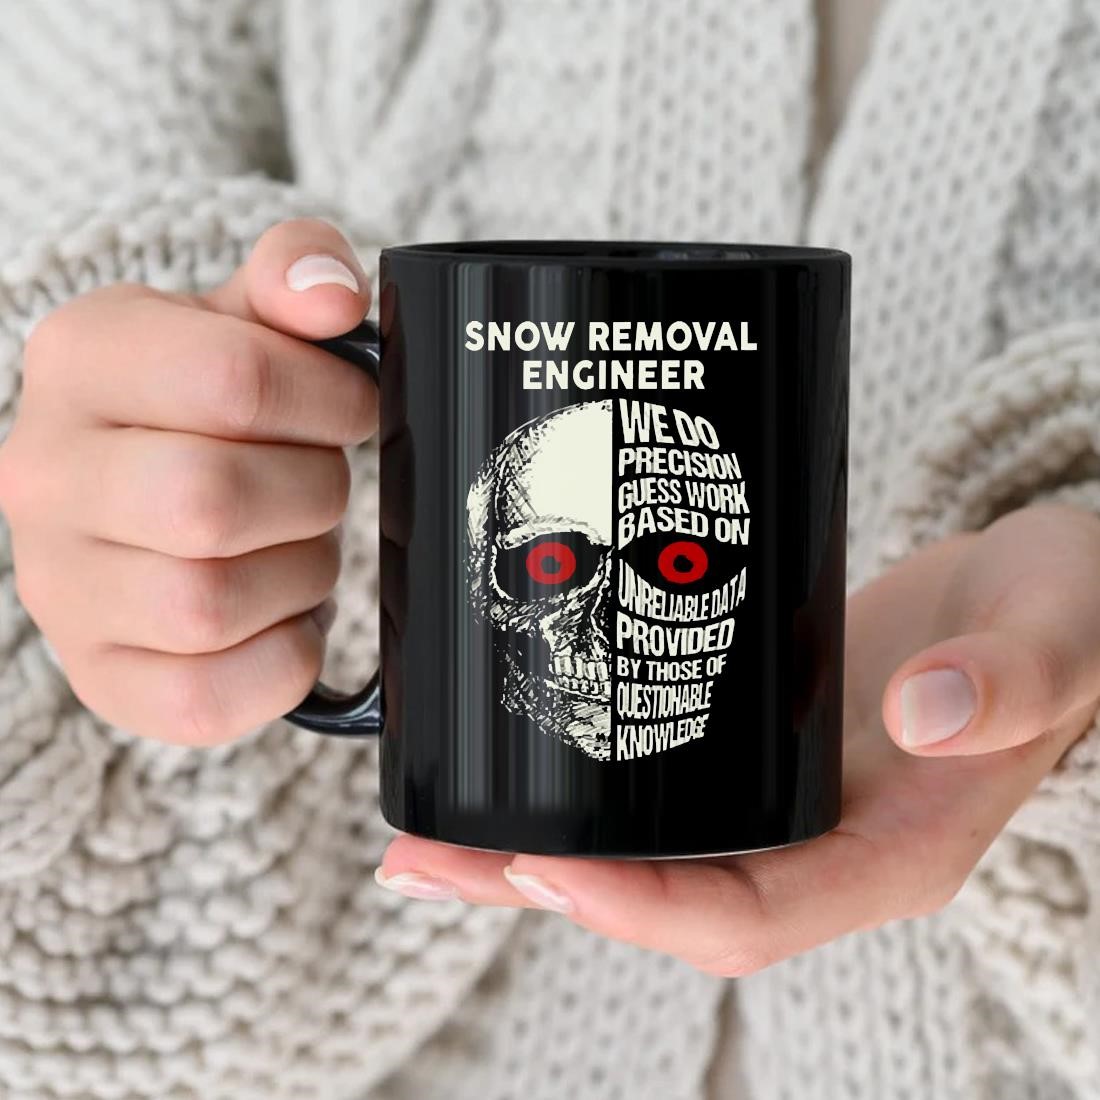 Snow Removal Engineer We Do Precision Guess Work Based On Unreliable Data Provided By Those Of Questionable Knowledge Skull Mug